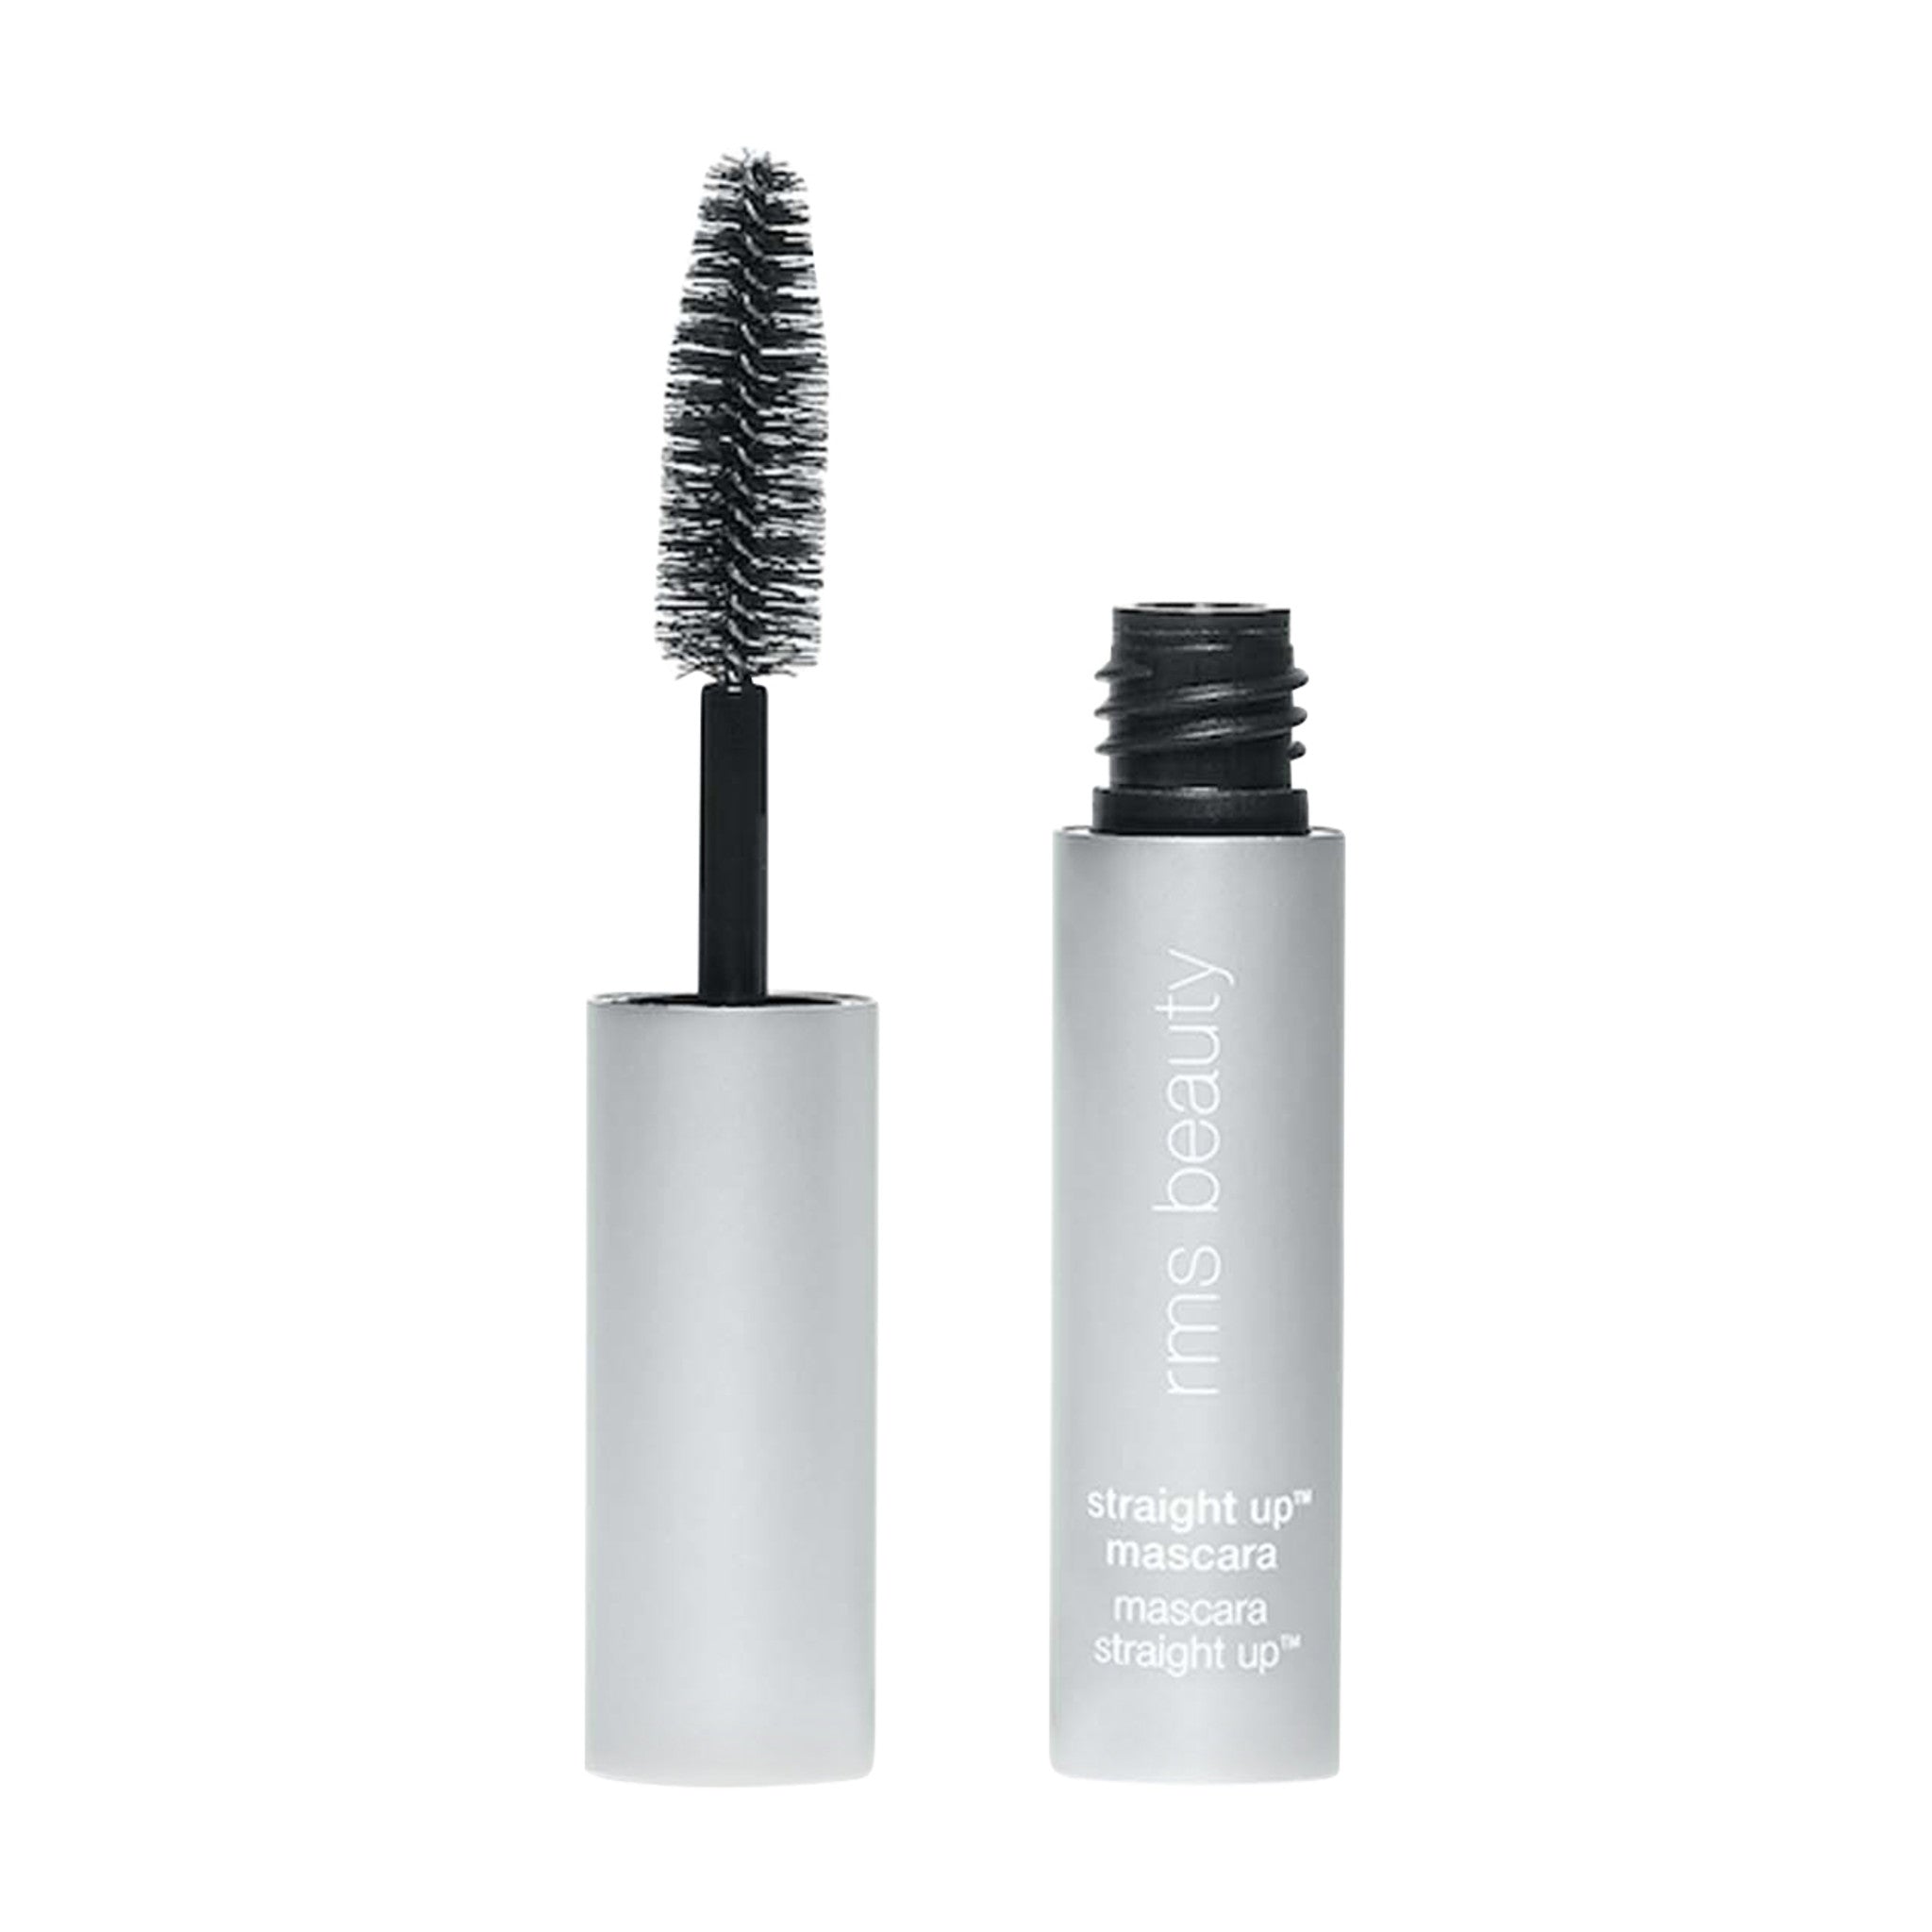 RMS Beauty Straight Up Volumizing Peptide Mascara Size variant: Travel main image. This product is in the color black